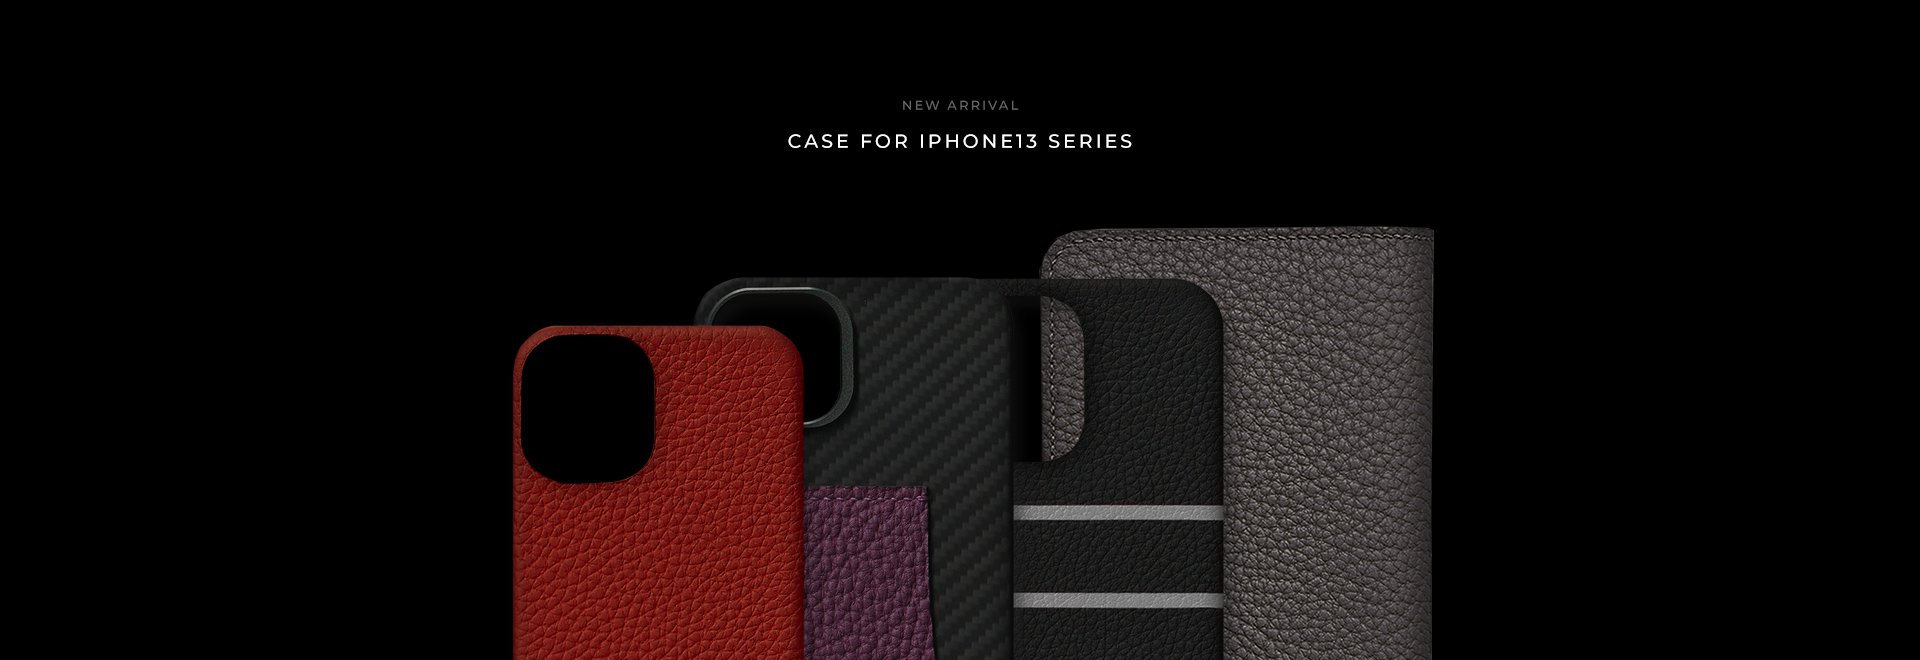 CASE FOR IPHONE 13 SERIES